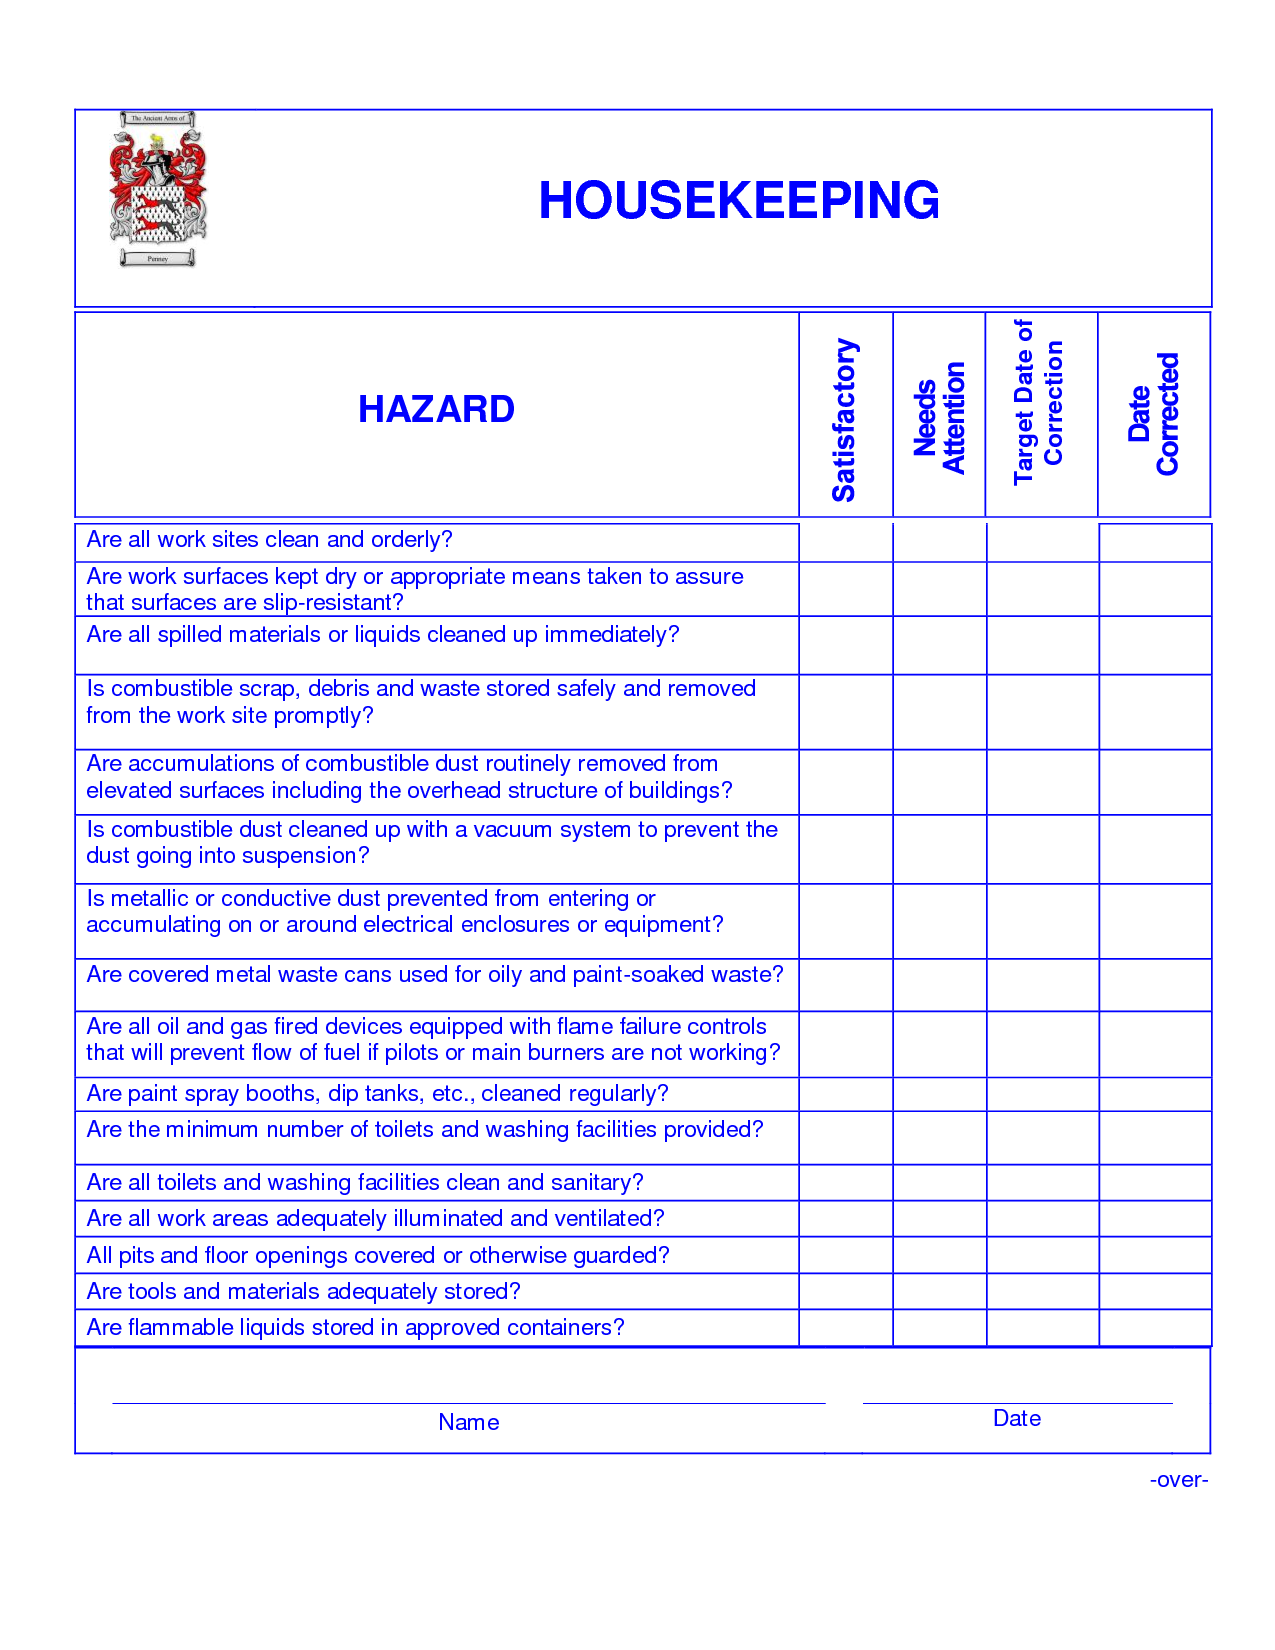 Housekeeping Checklist Template 5 Things You Probably Didn t Know About 